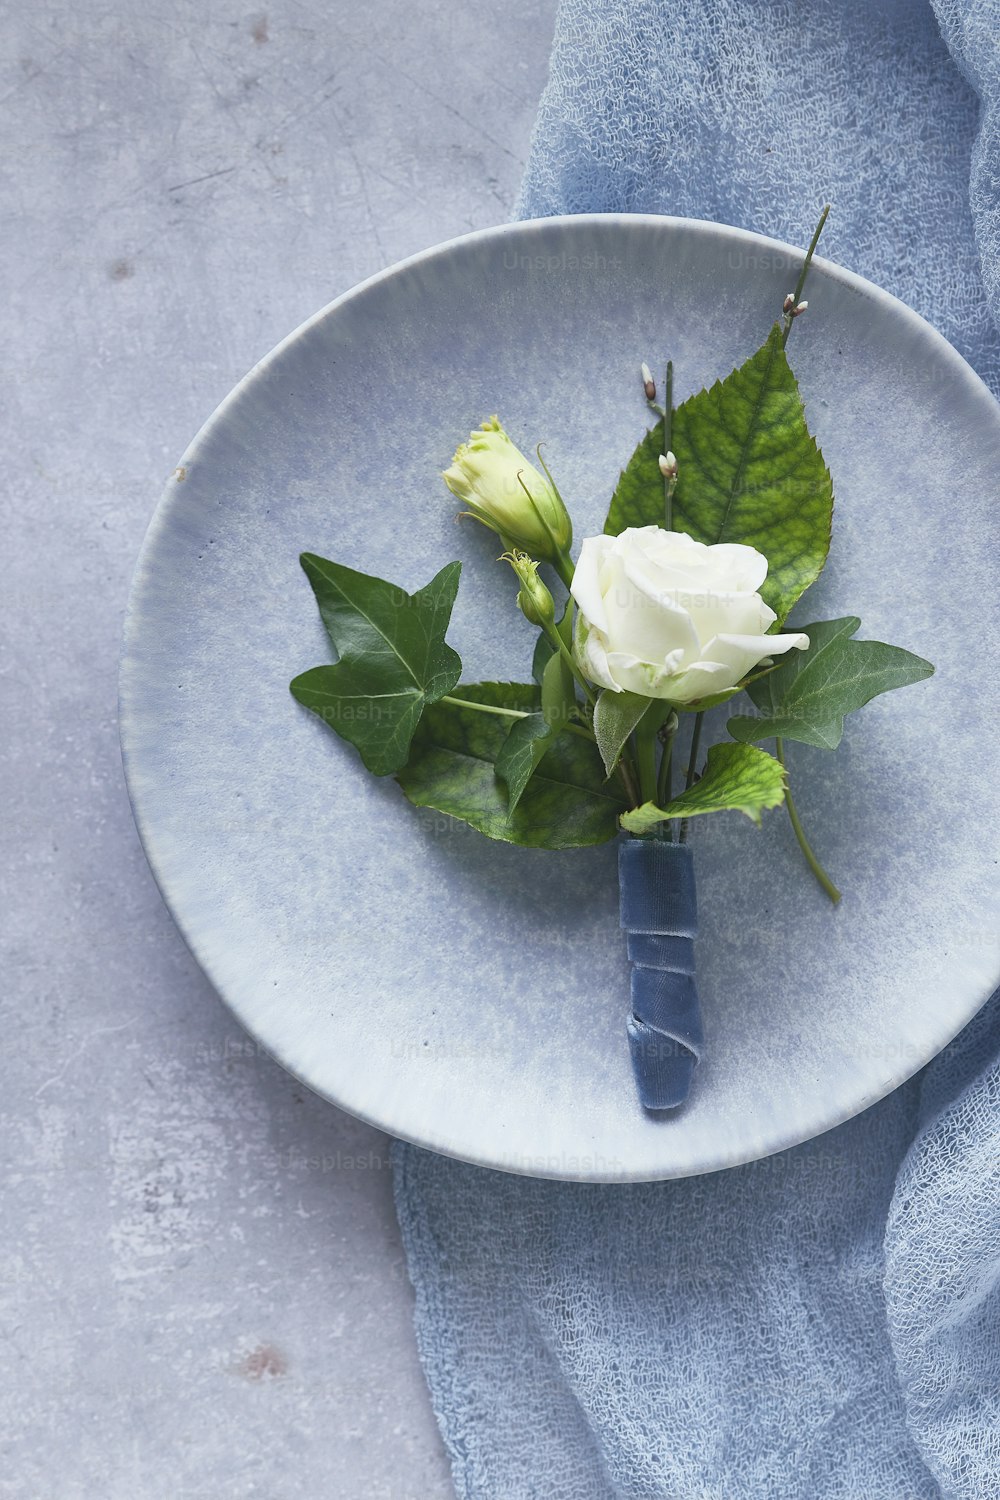 a white rose and green leaves on a plate